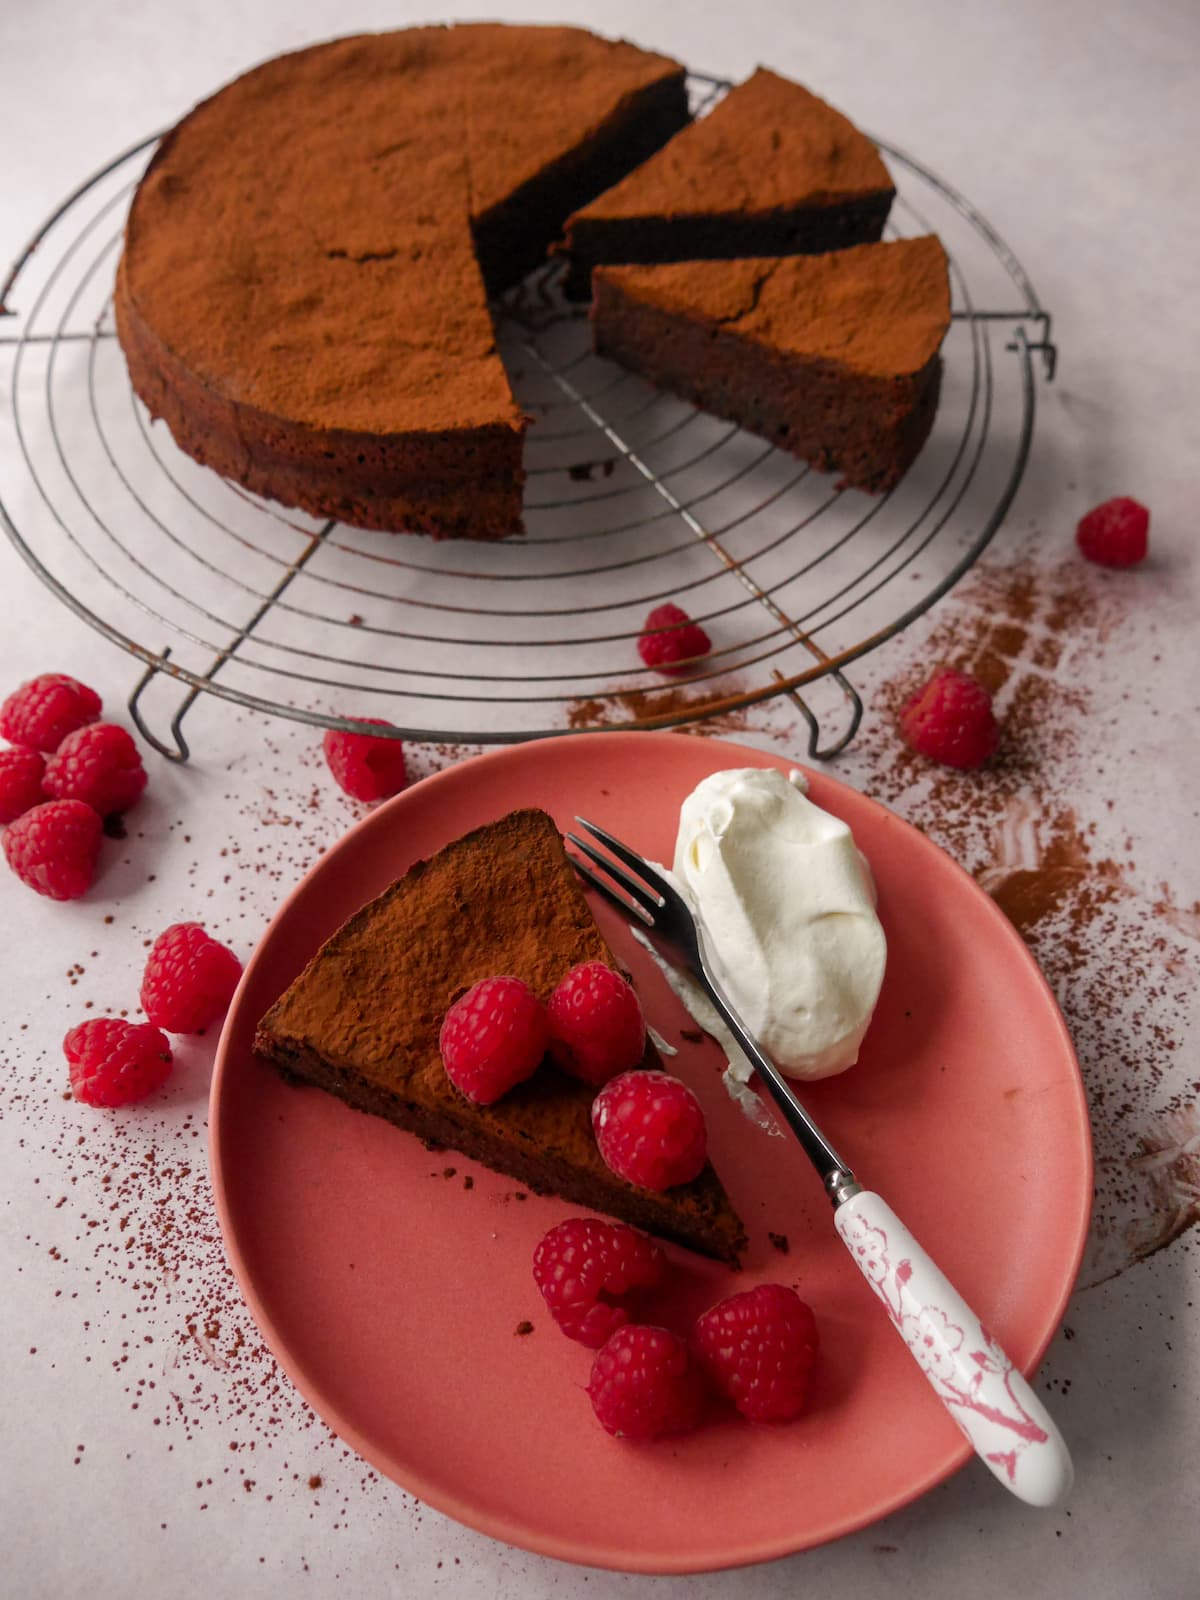 A flourless chocolate cake with amaretto sliced and set on a wire rack, with a pink plate with a slice of flourless chocolate amaretto cake topped with fresh raspberries and served with whipped cream set alongside.